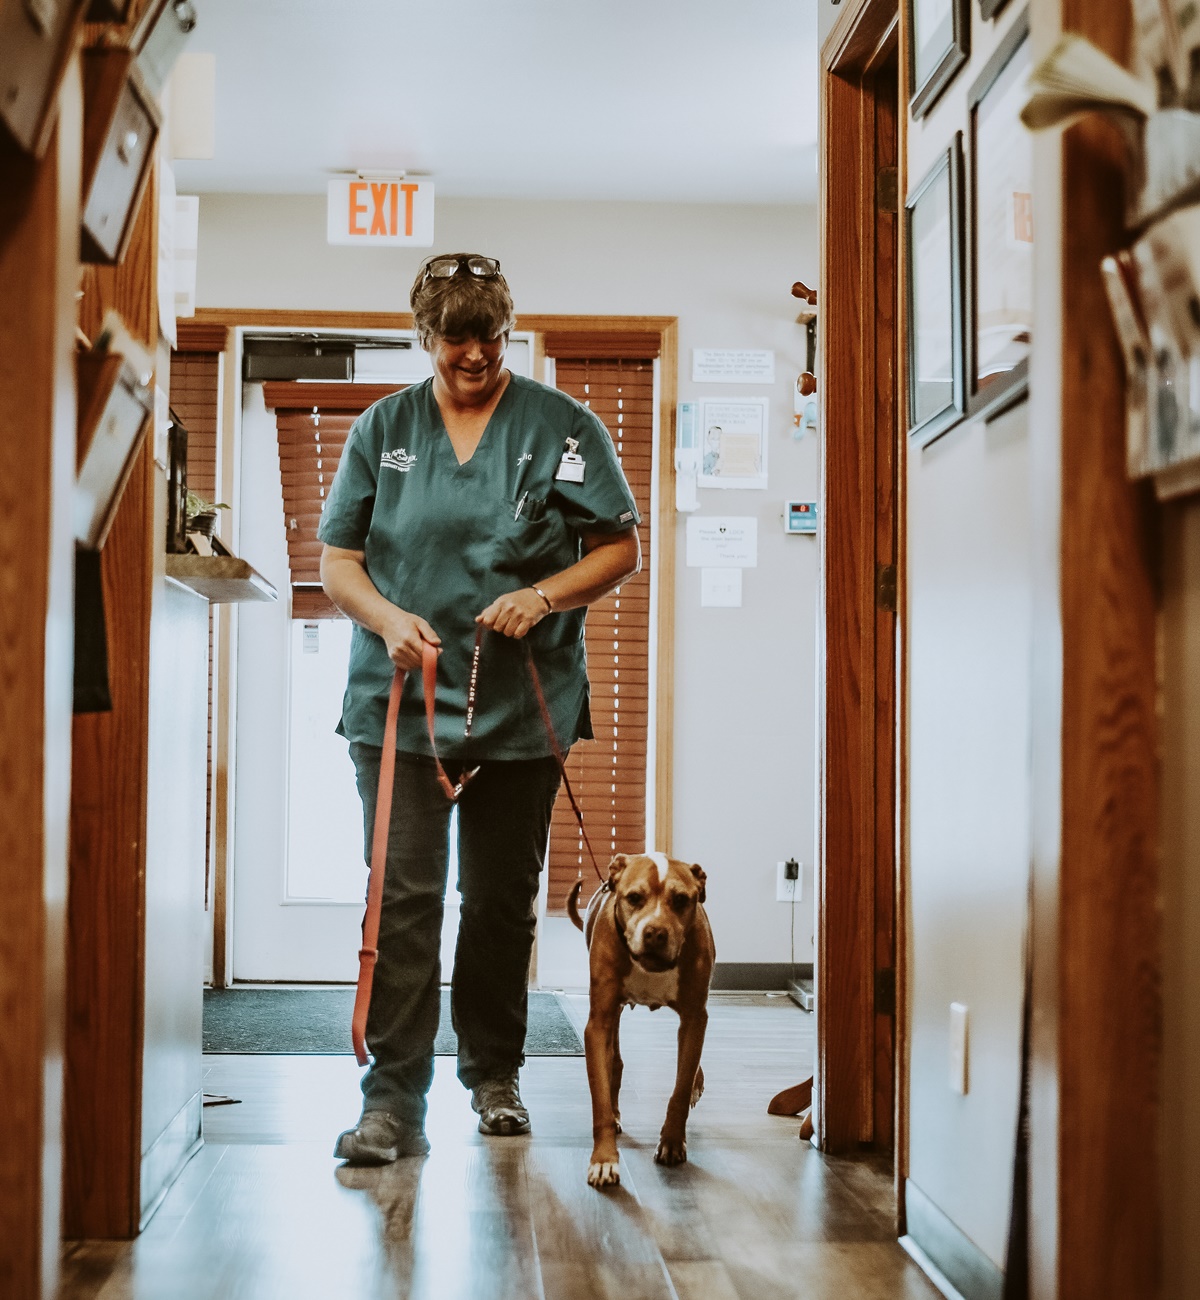 Vet and dog walking in a hallway